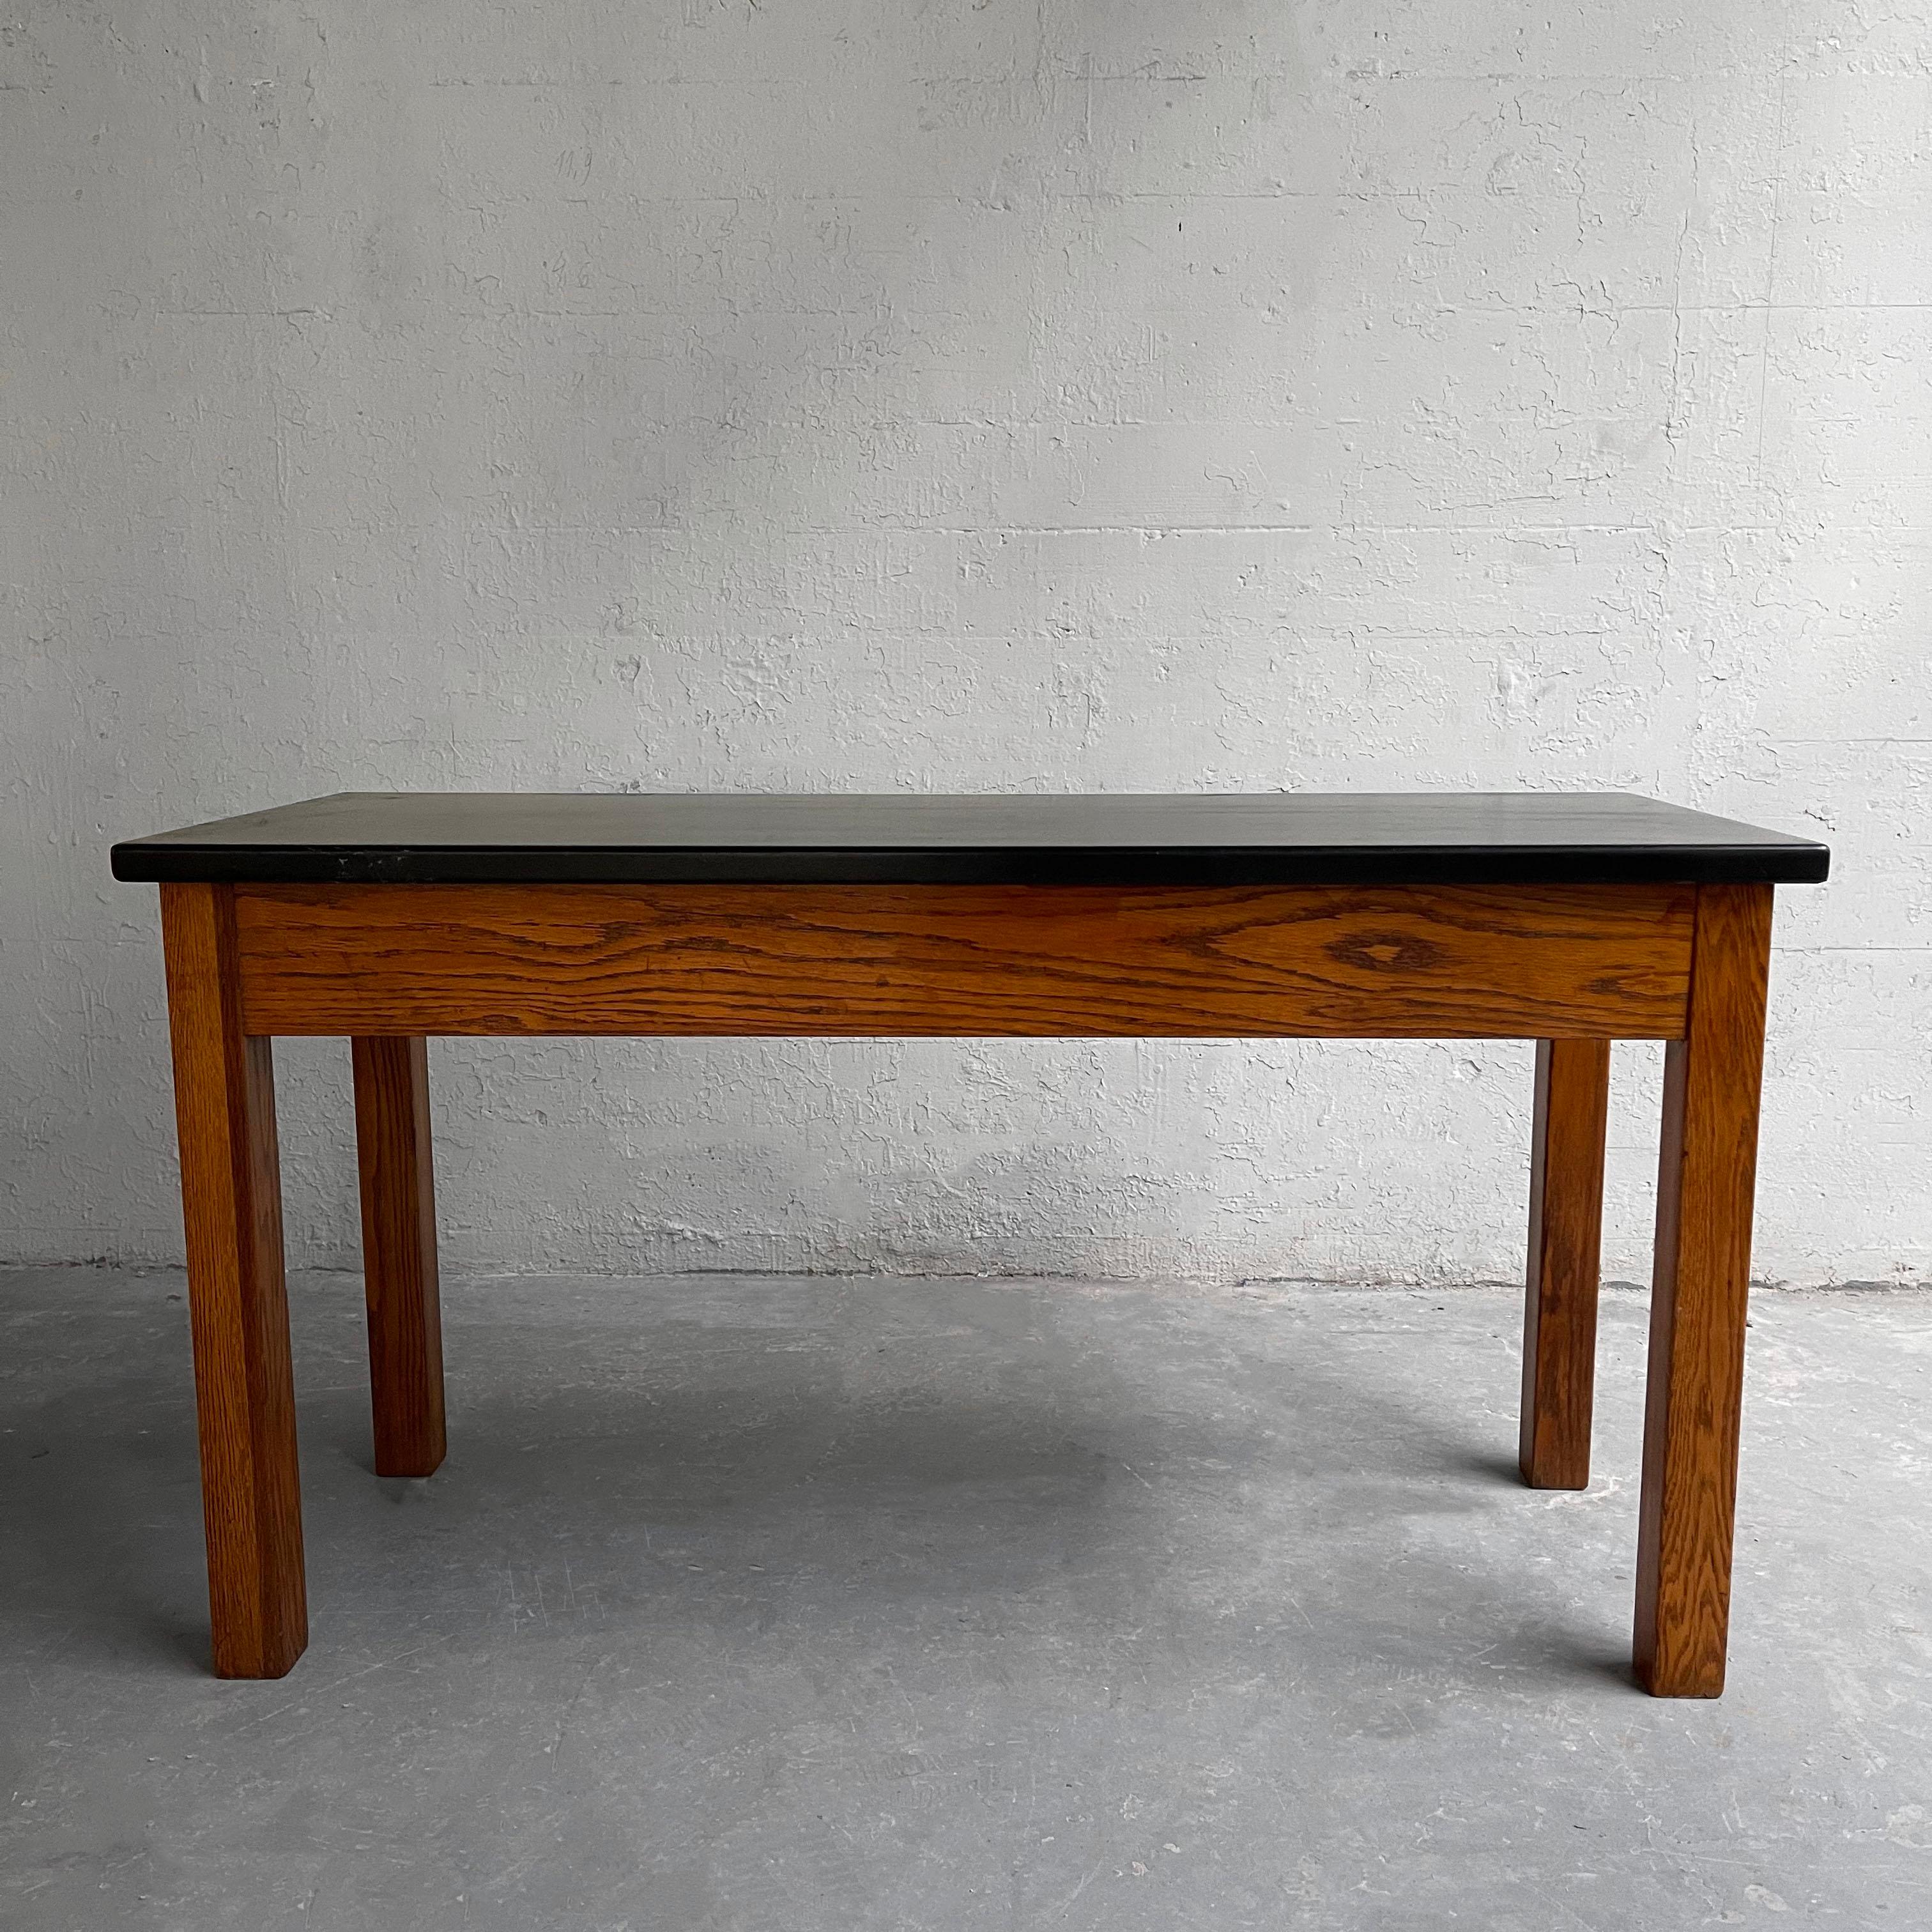 Midcentury, industrial, laboratory console table features an oak base with black, acid-resistant composite top for experiments. This piece makes a great console, slender desk or media table.